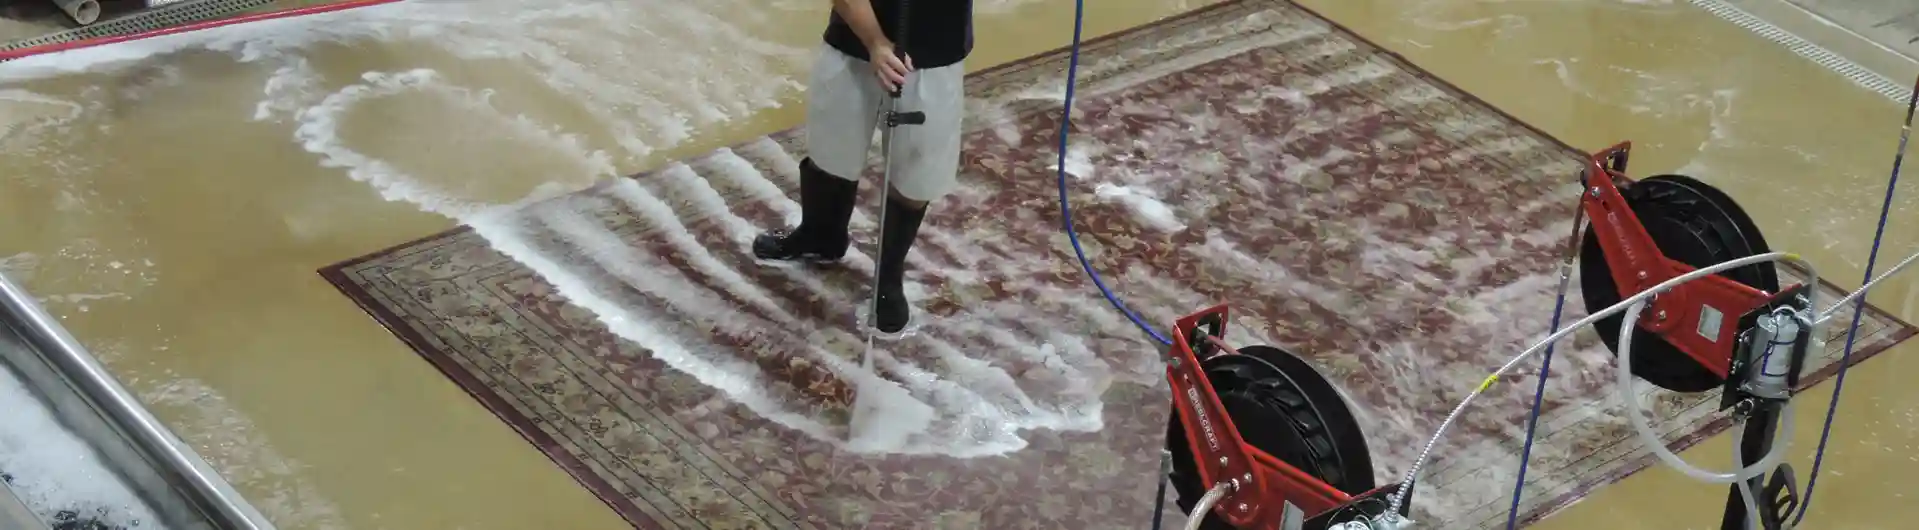 Oriental Rug Cleaning Services Oklahoma